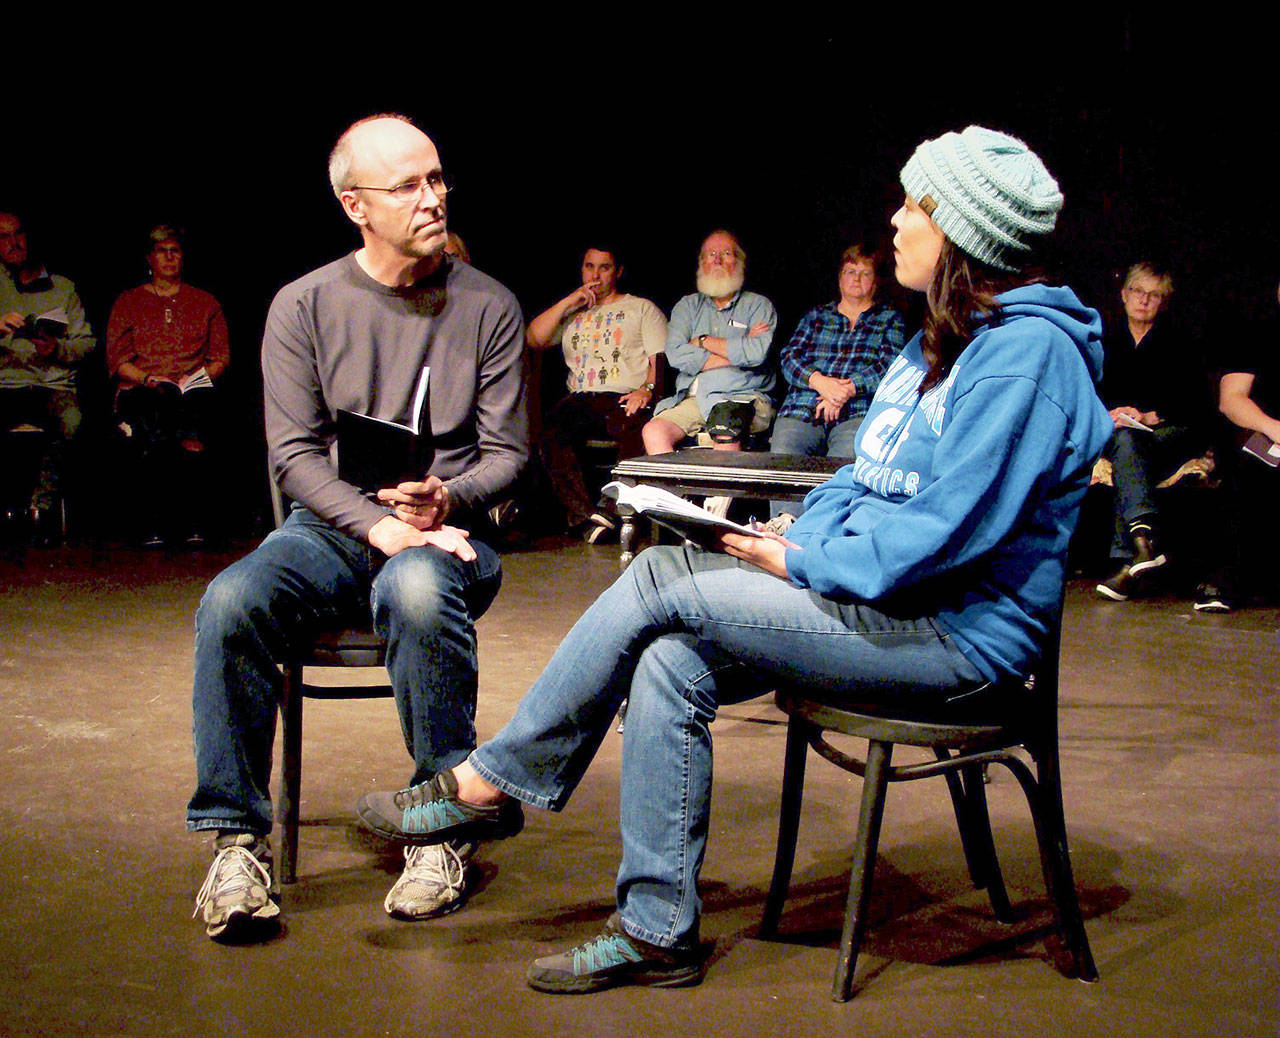 Ken Winters and Kristin Ulsund are in the foreground in this photograph of “The Laramie Project: Ten Years Later.” Visible in the background are, from left, Frank Barevich, Bob Bronsink, Barbara Frederick and Naomi Denhart. (Amy McIntyre)